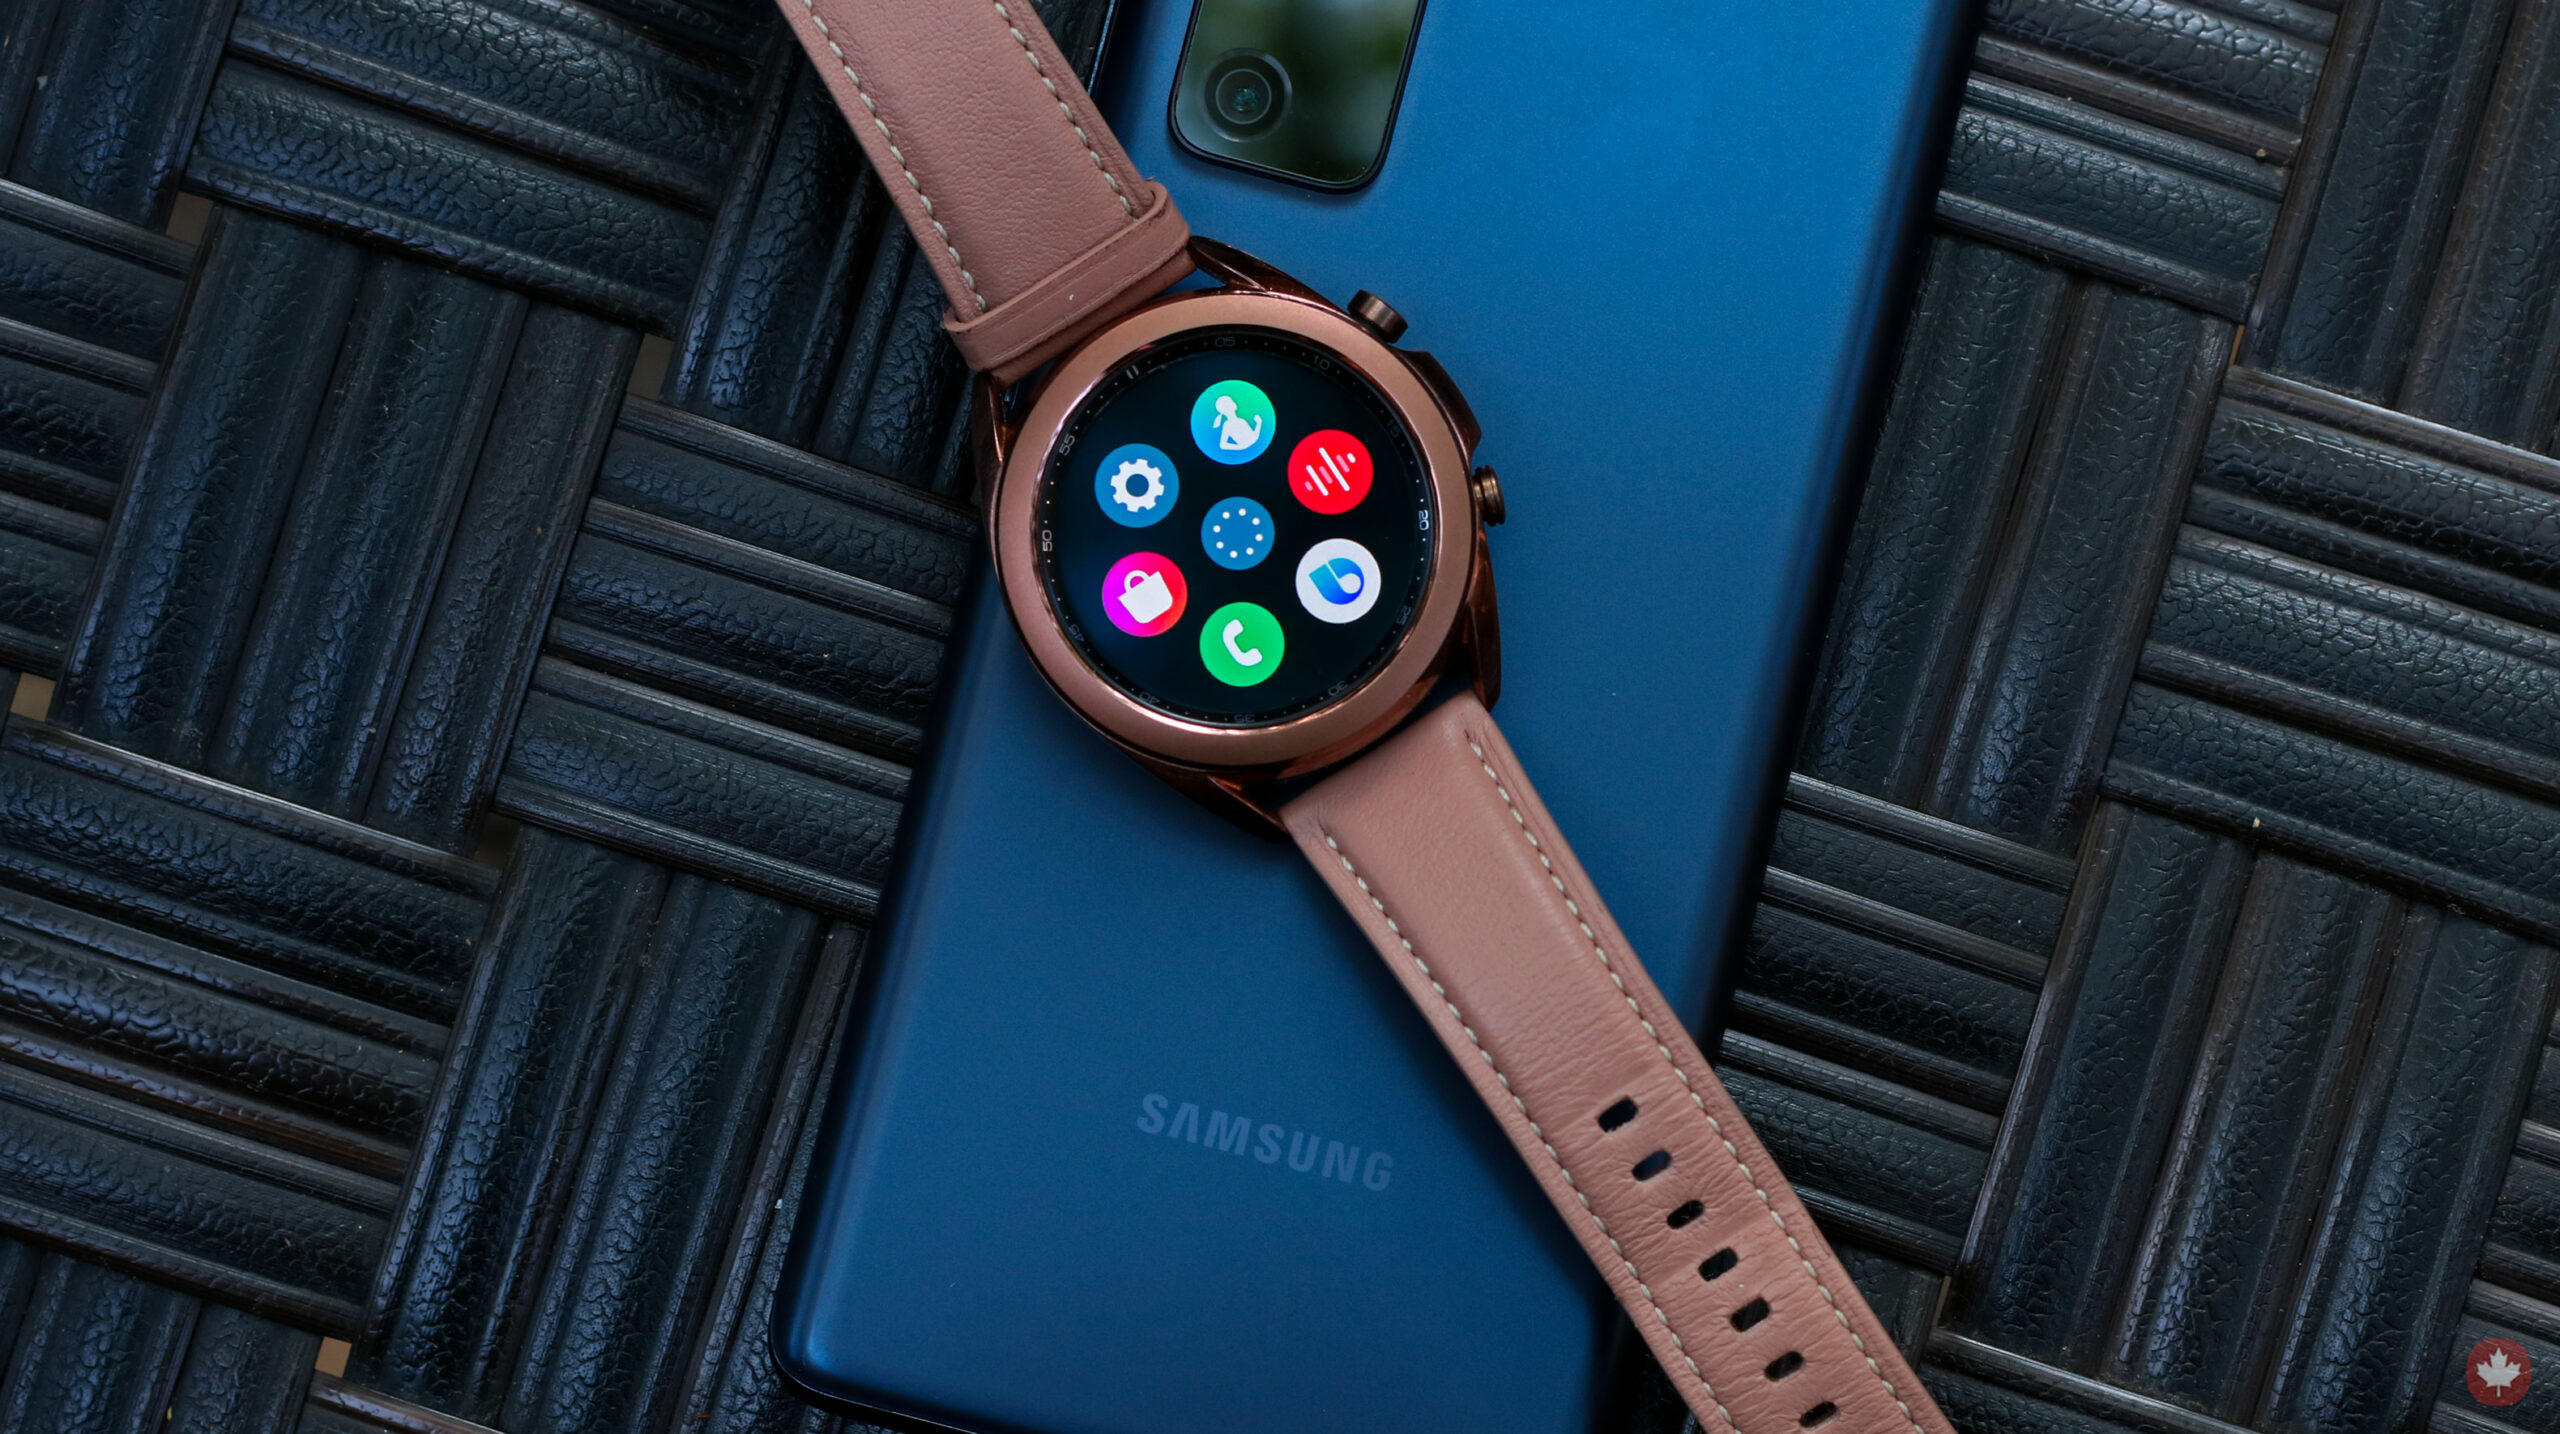 Samsung Galaxy Watch 3 Review The Premium Android Smartwatch